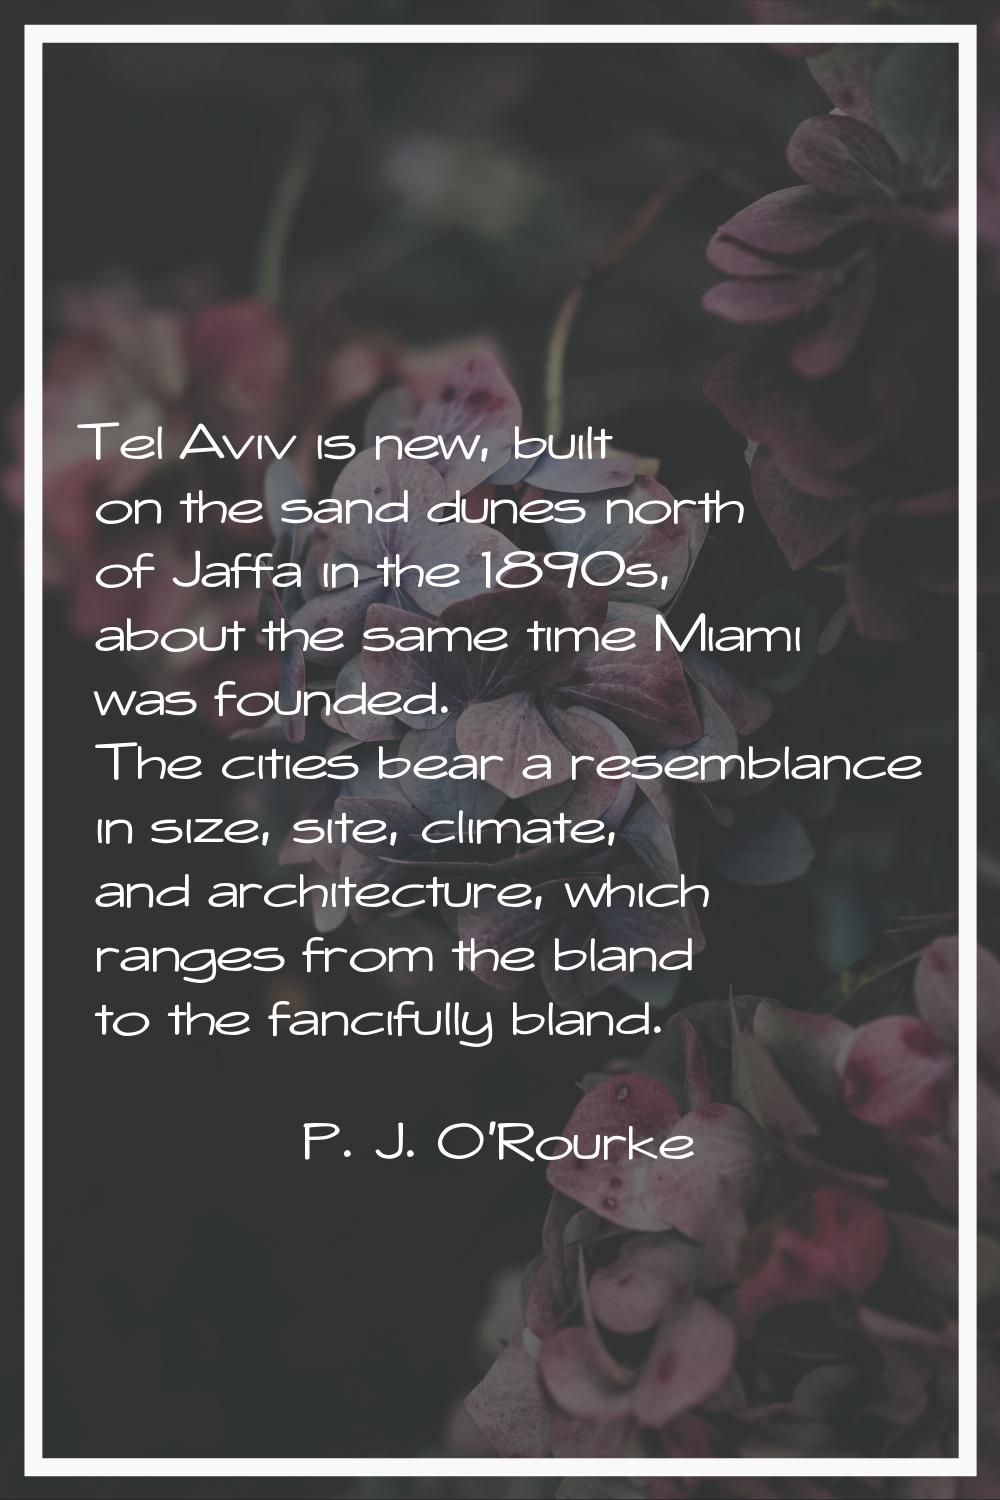 Tel Aviv is new, built on the sand dunes north of Jaffa in the 1890s, about the same time Miami was